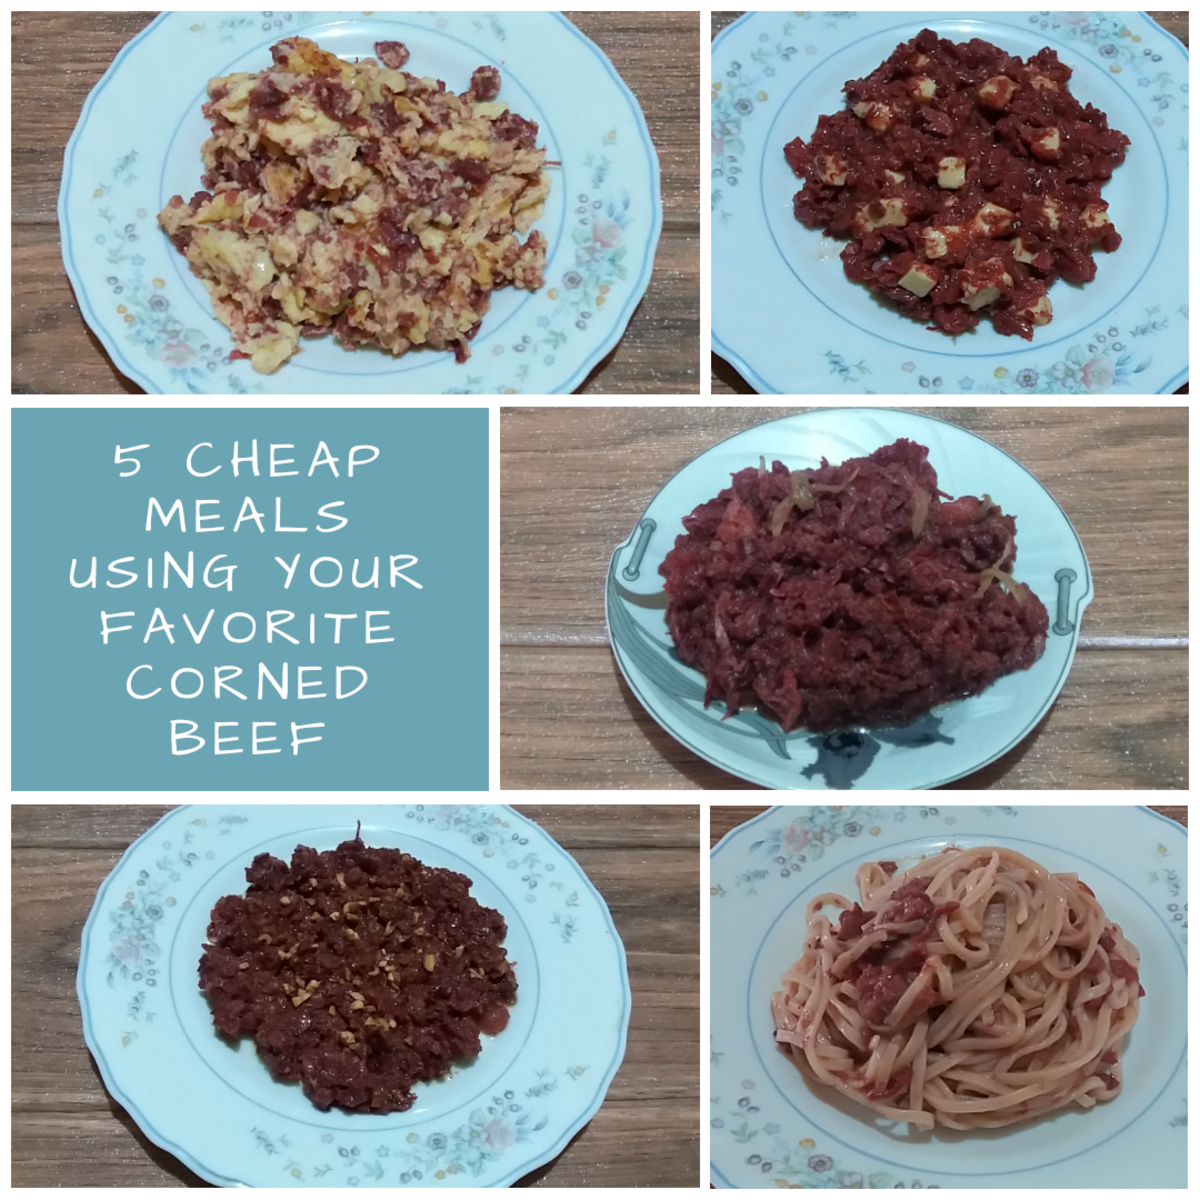 5 cheap meals using your favorite corned beef